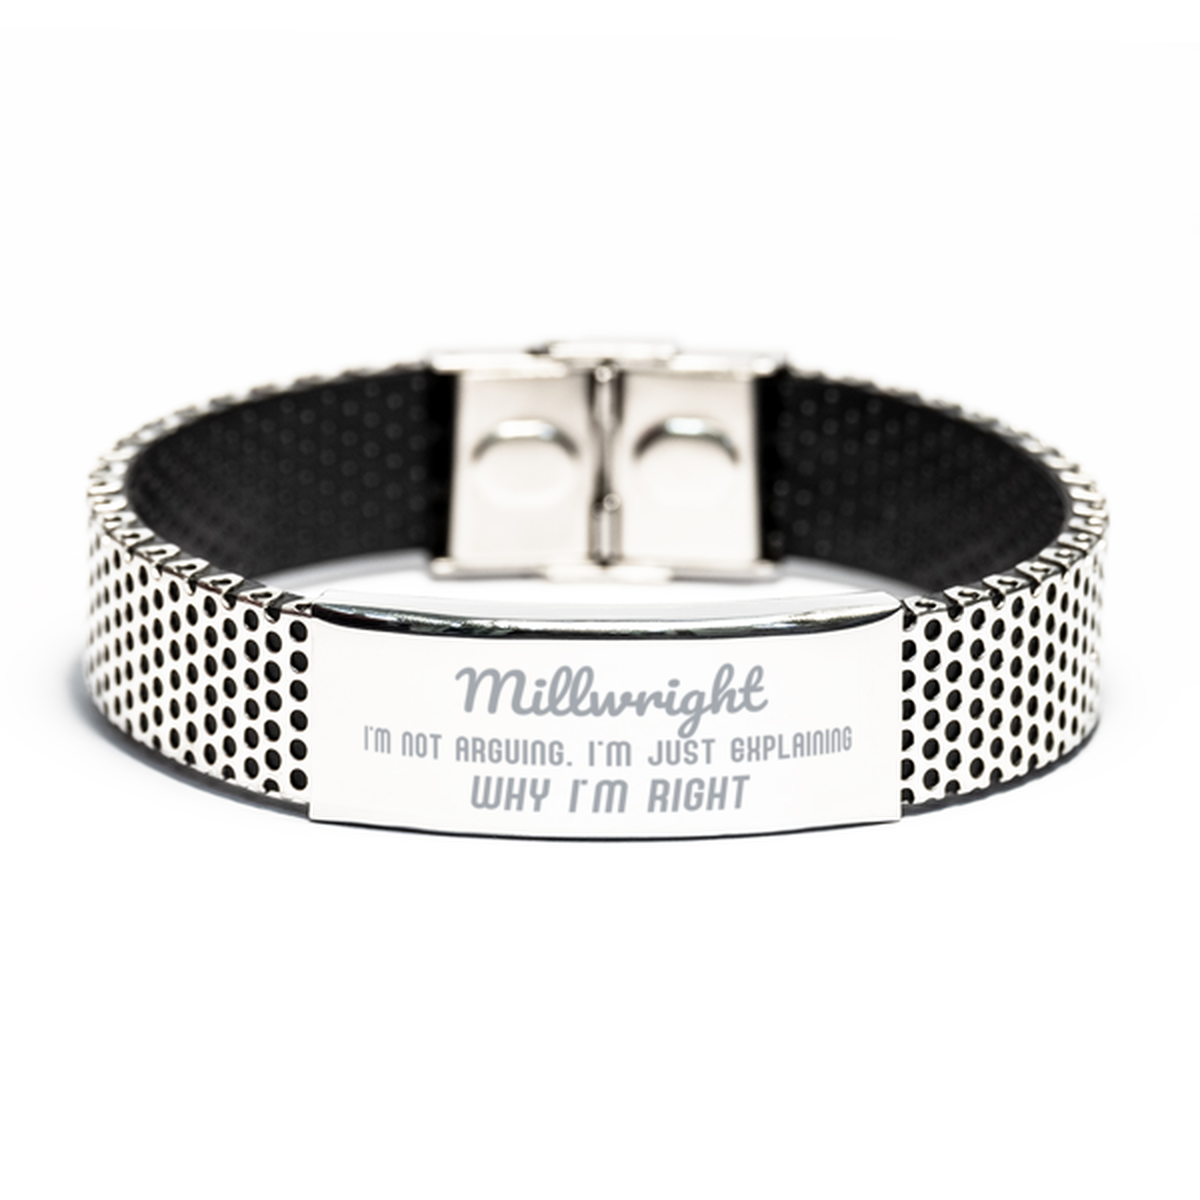 Millwright I'm not Arguing. I'm Just Explaining Why I'm RIGHT Stainless Steel Bracelet, Funny Saying Quote Millwright Gifts For Millwright Graduation Birthday Christmas Gifts for Men Women Coworker